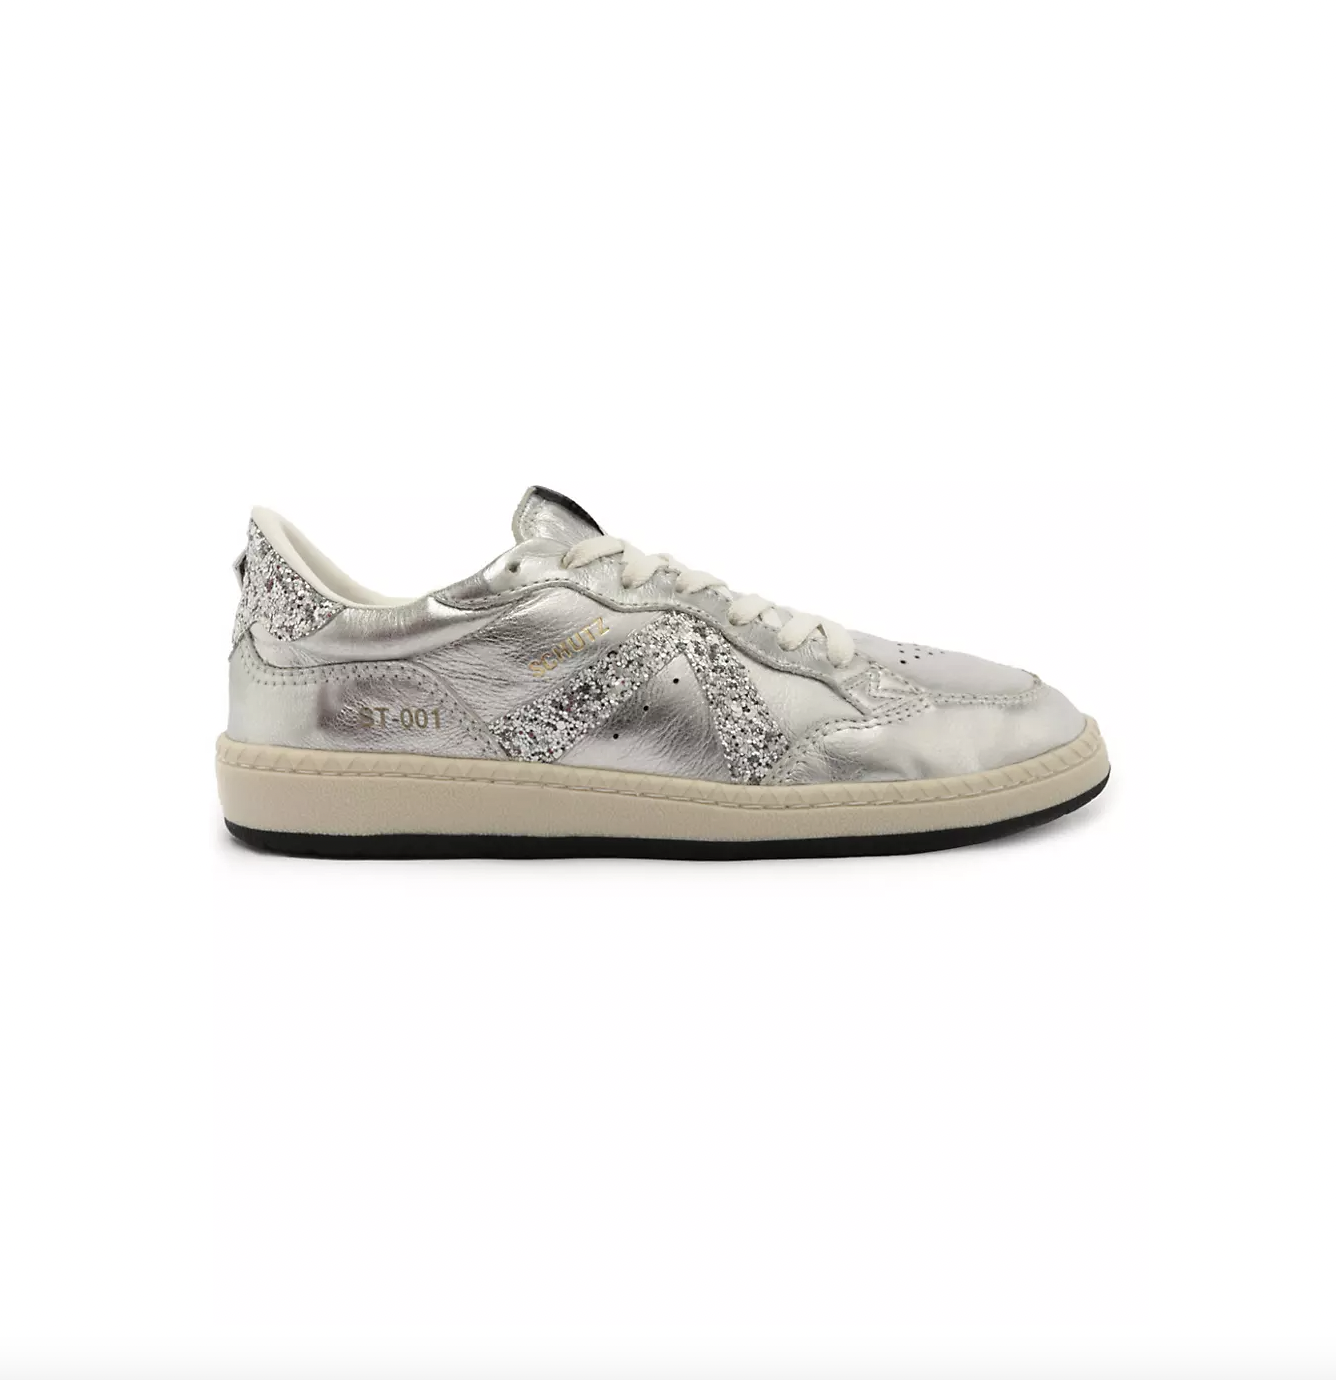 Luxury Designer Superbalist Sneakers For Women And Men Colorful Silk  Cowhide With Rhinestone Embellishments NJHJN00001 From Huiman01, $111.11 |  DHgate.Com